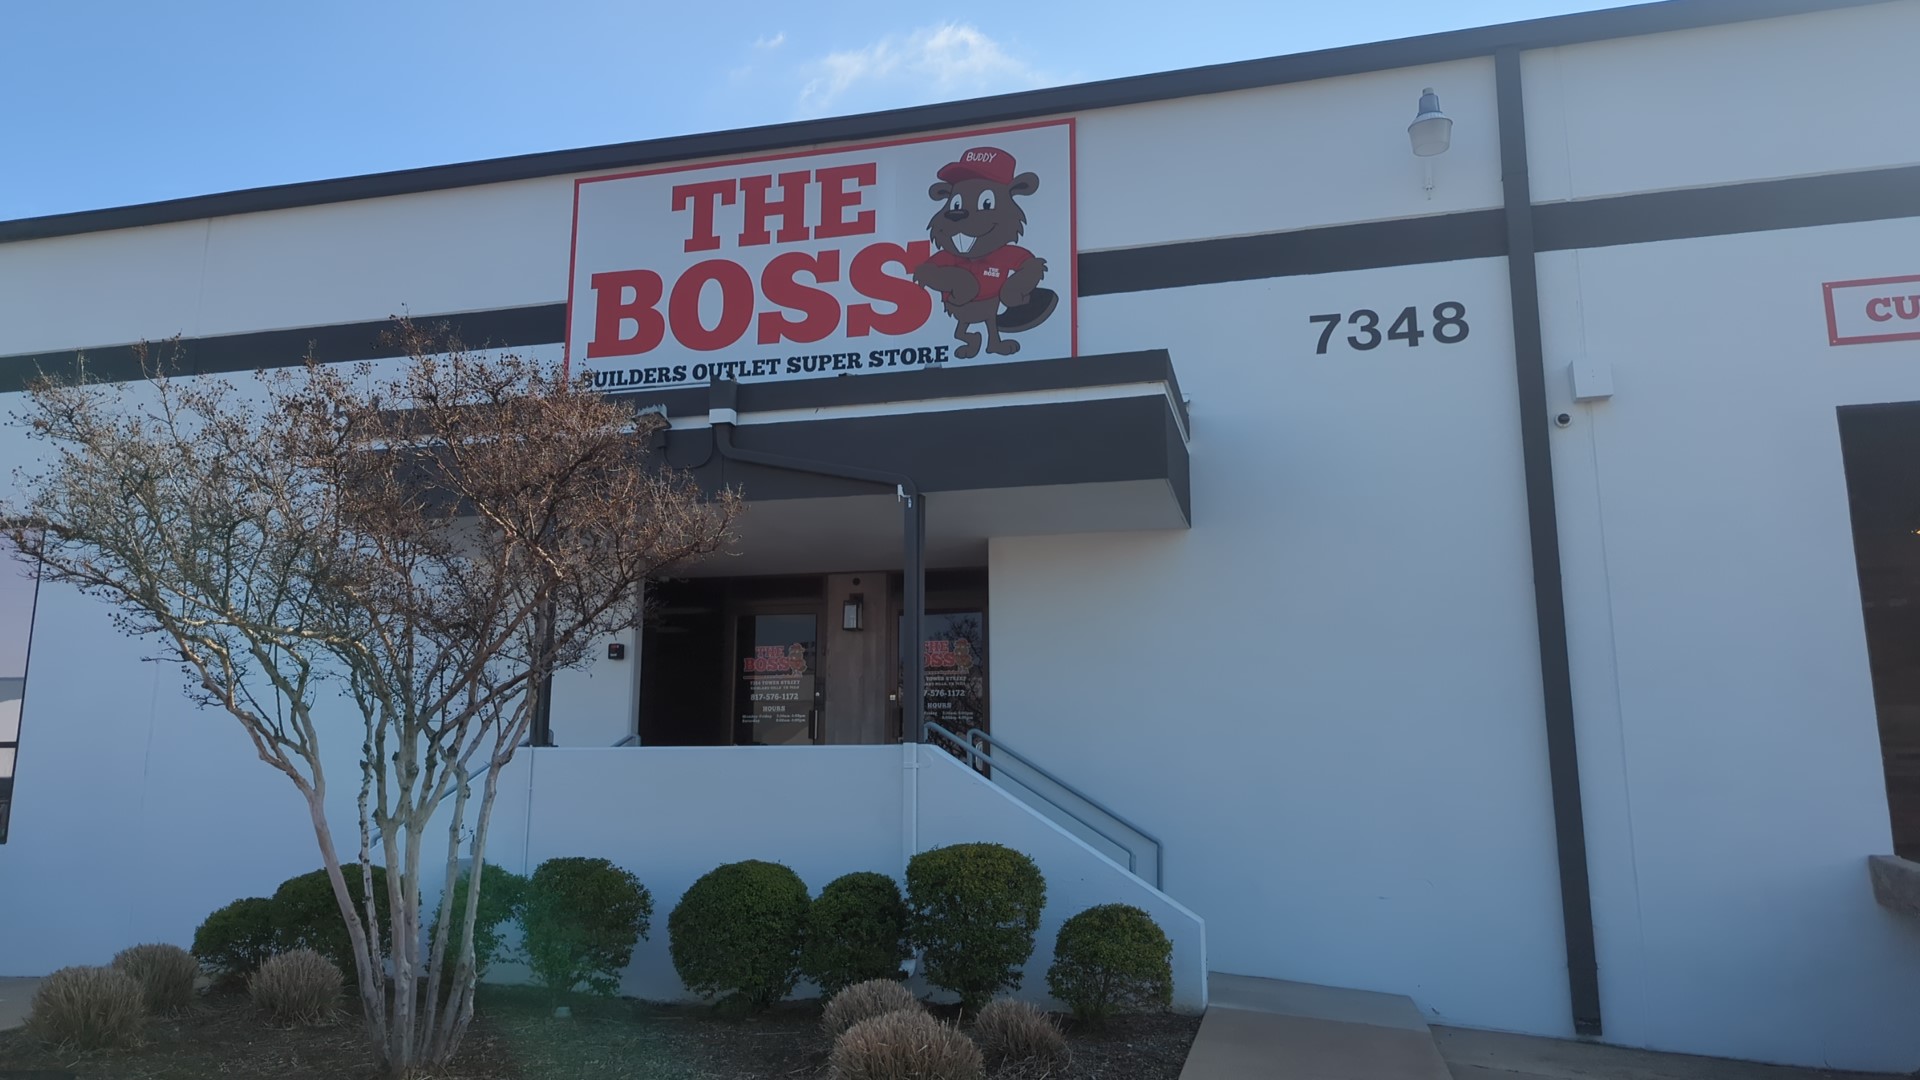 The BOSS - Builders Outlet Super Store | Ft Worth